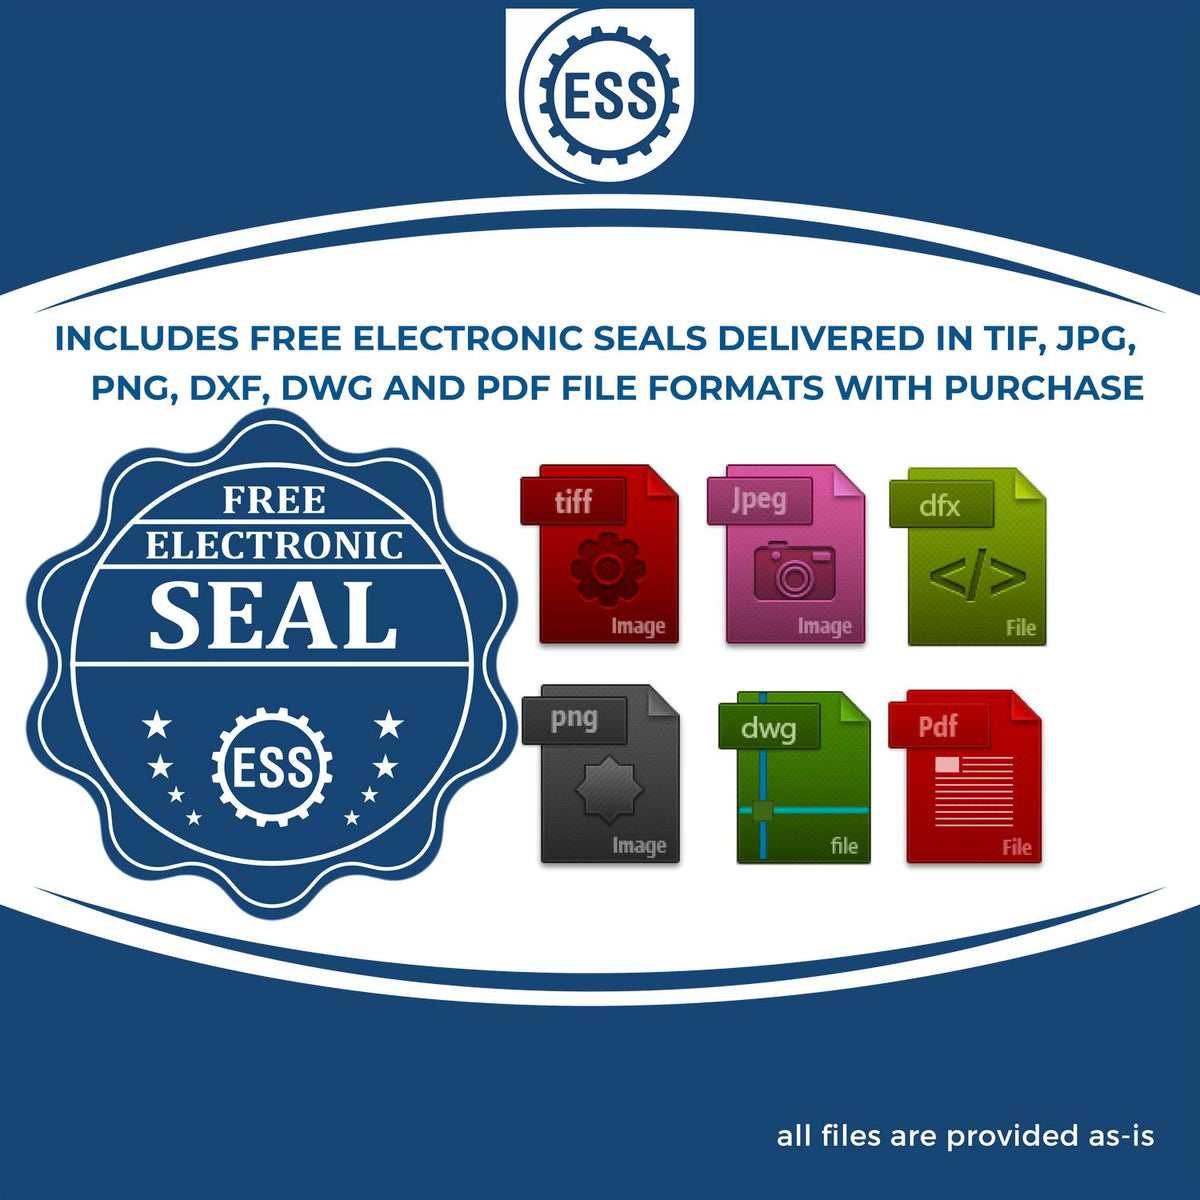 An infographic for the free electronic seal for the Slim Pre-Inked New Mexico Professional Engineer Seal Stamp illustrating the different file type icons such as DXF, DWG, TIF, JPG and PNG.